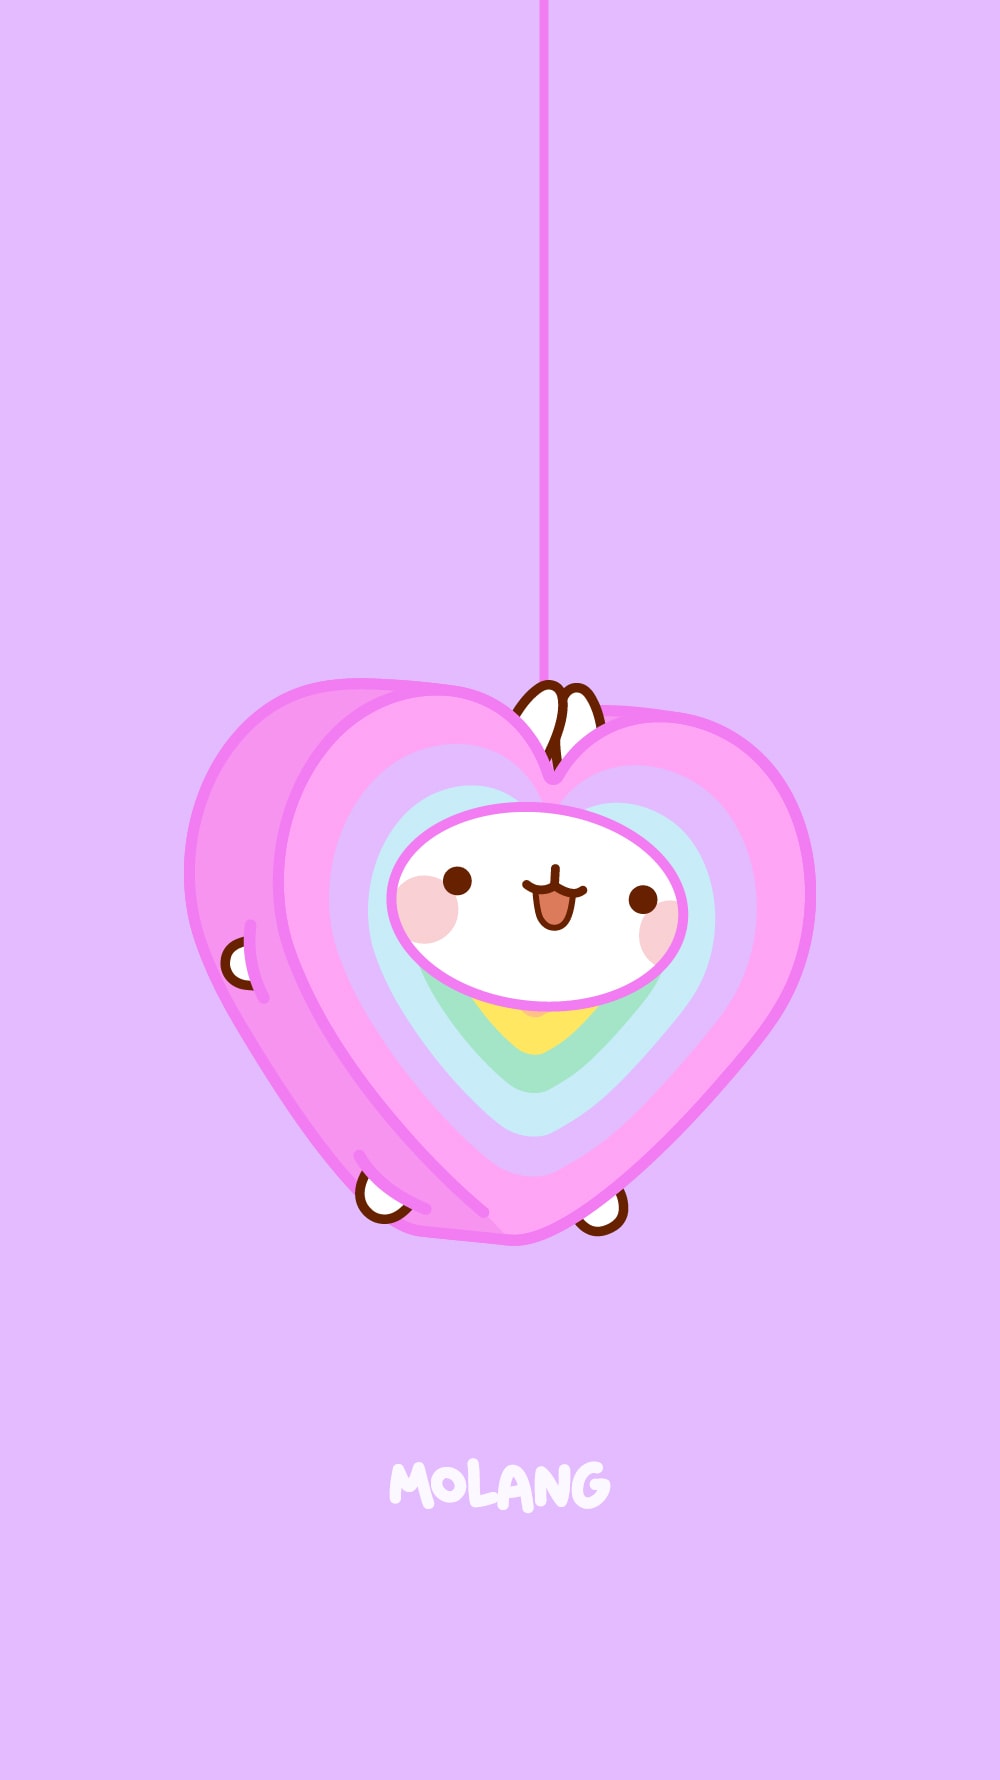 Free Valentines day screensavers and wallpapers - Vanity Owl